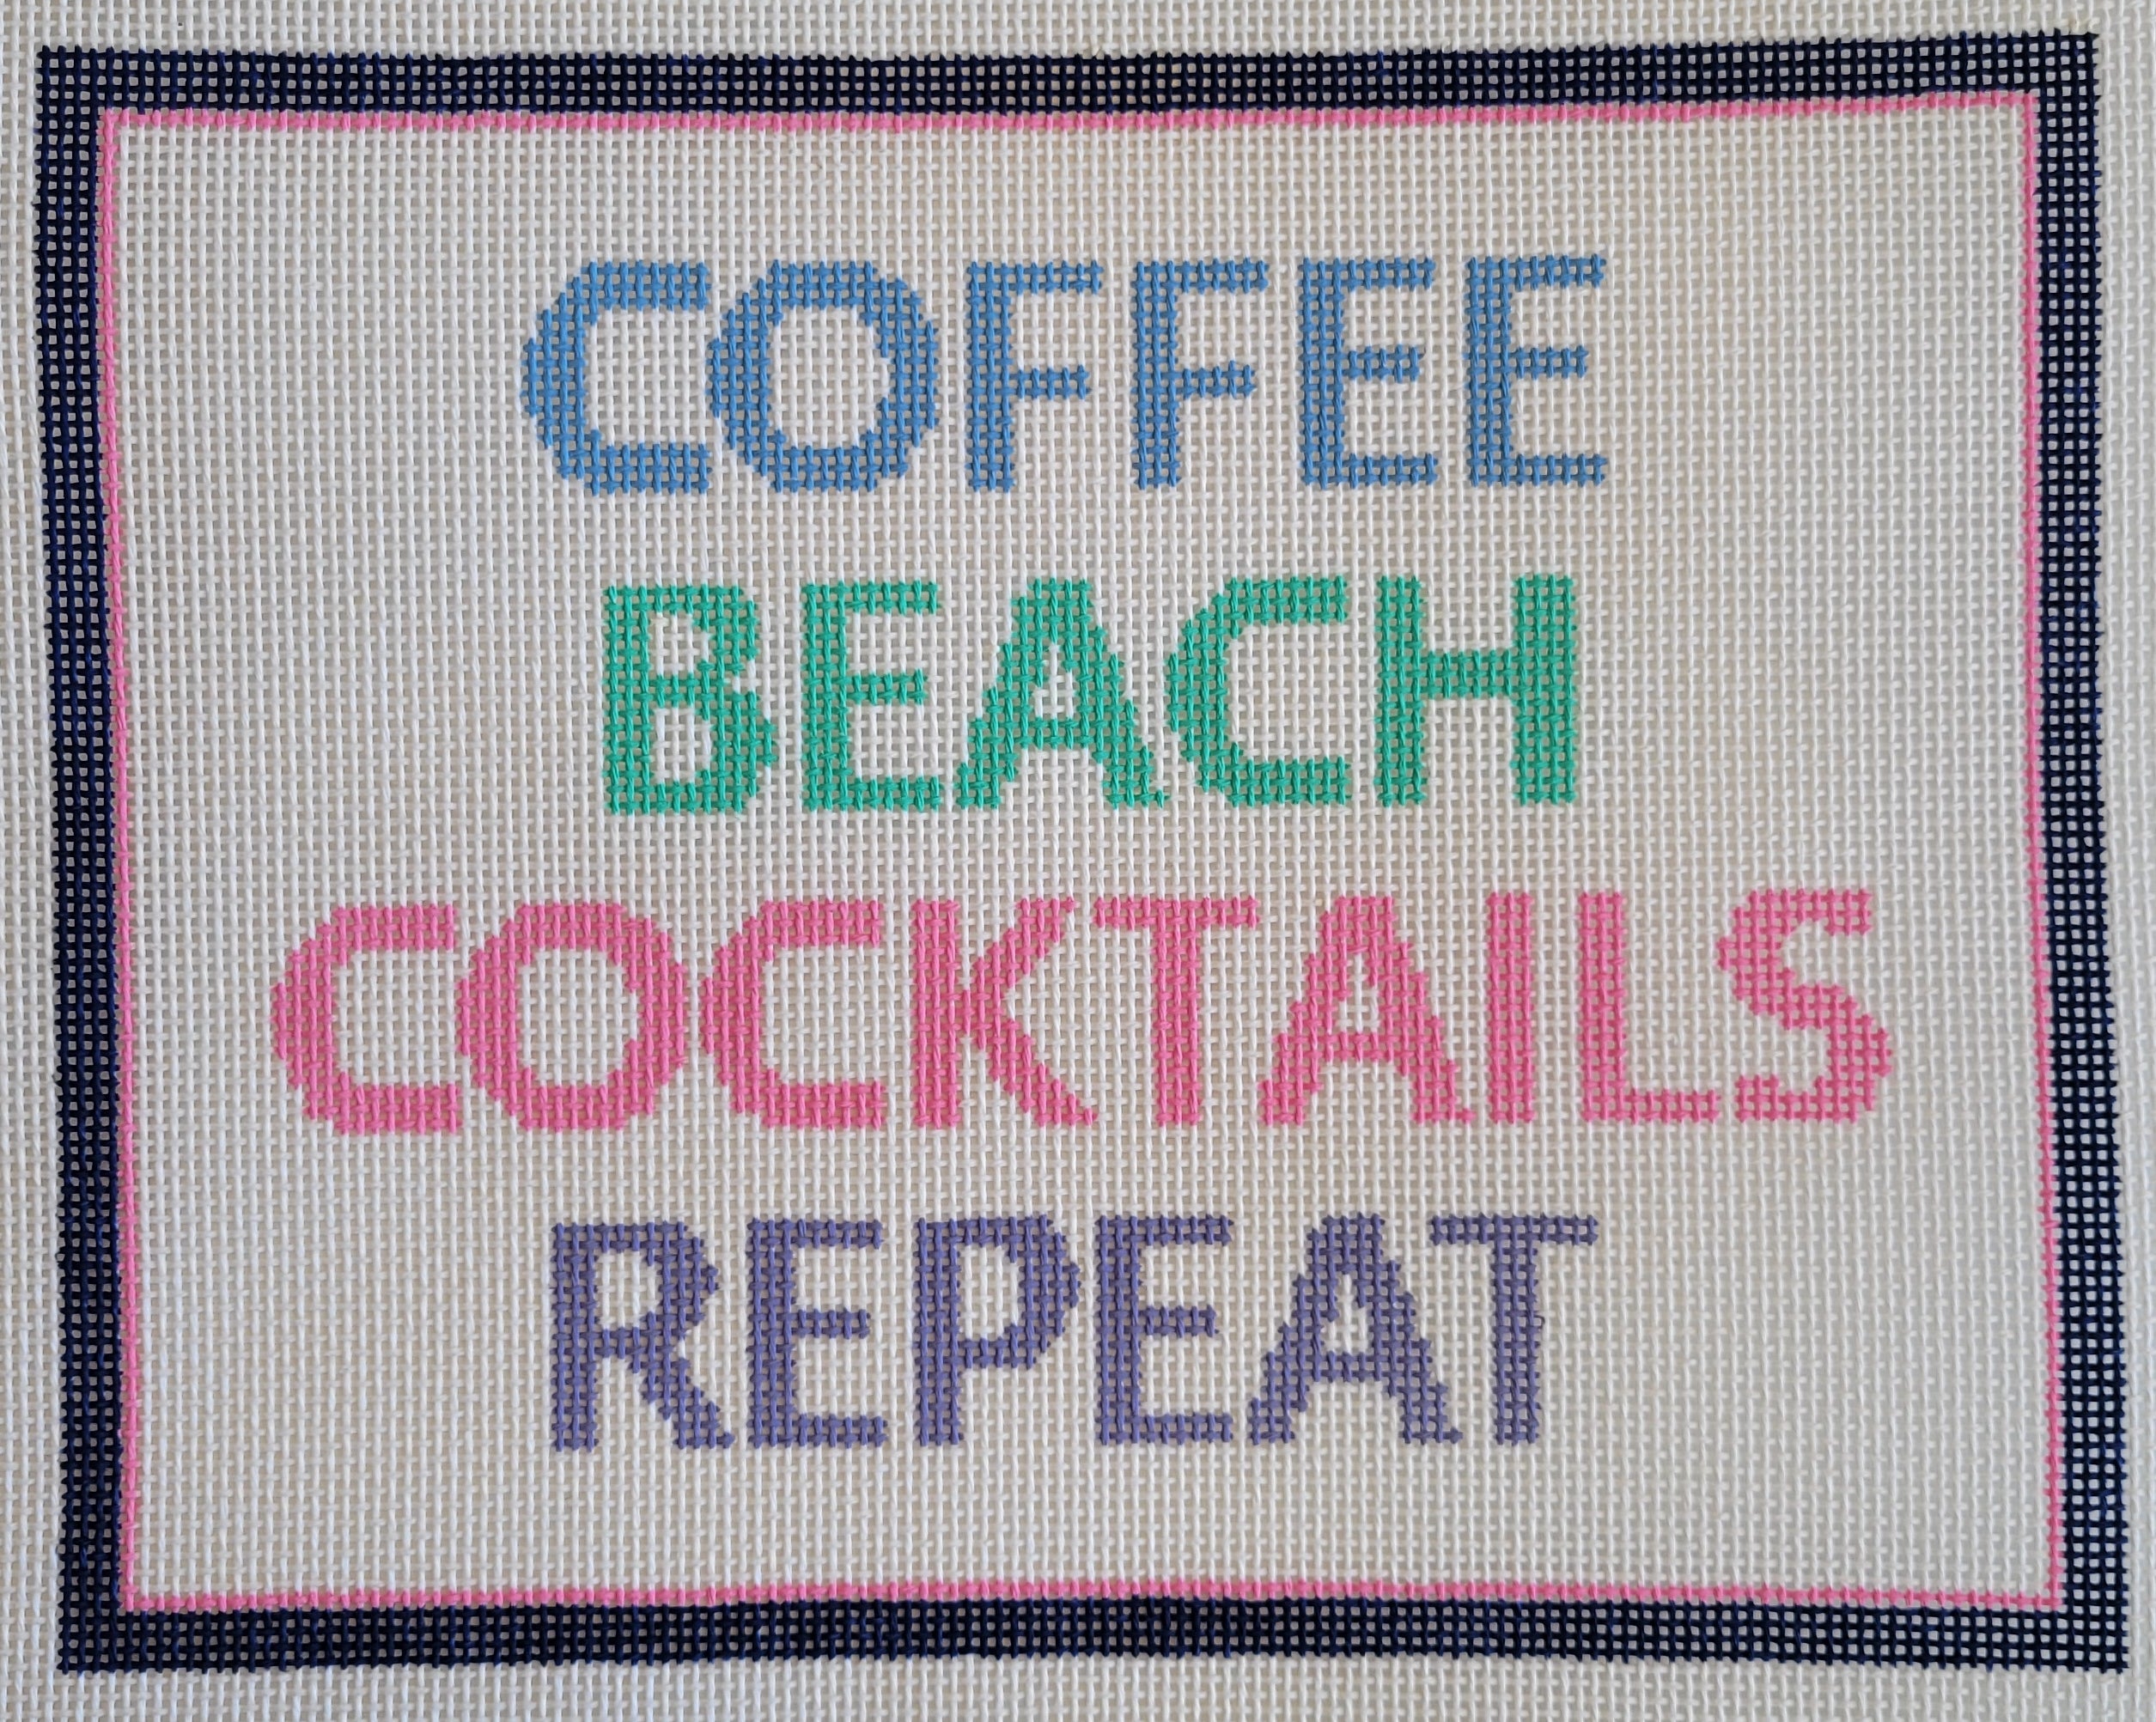 Coffee, Beach, Cocktails, Repeat 18ct